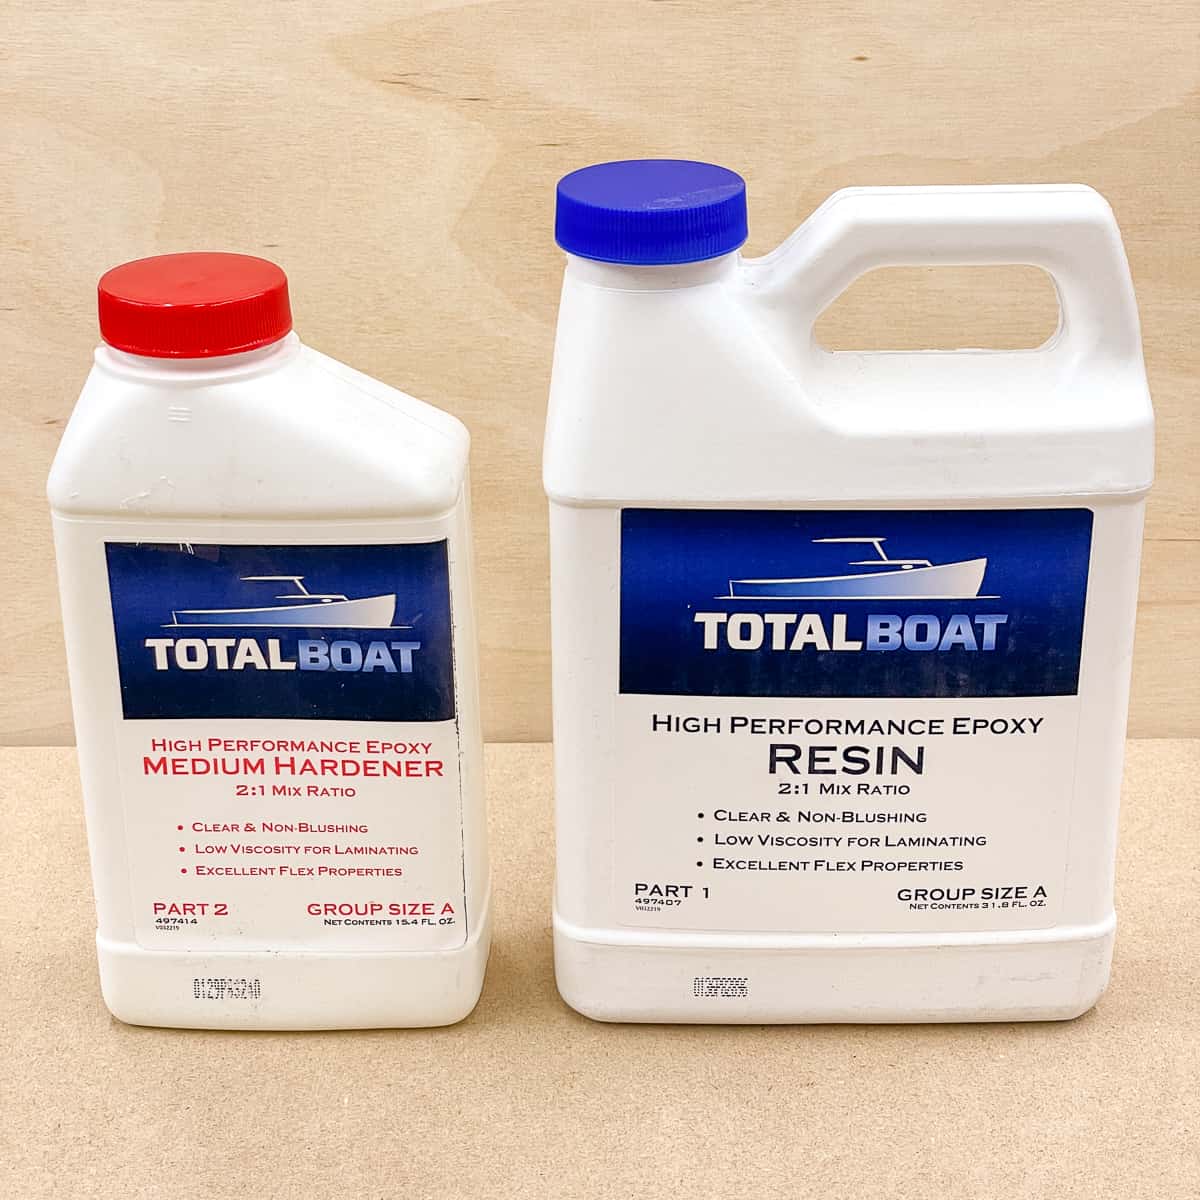 Total Boat High Performance Epoxy Resin and Hardener